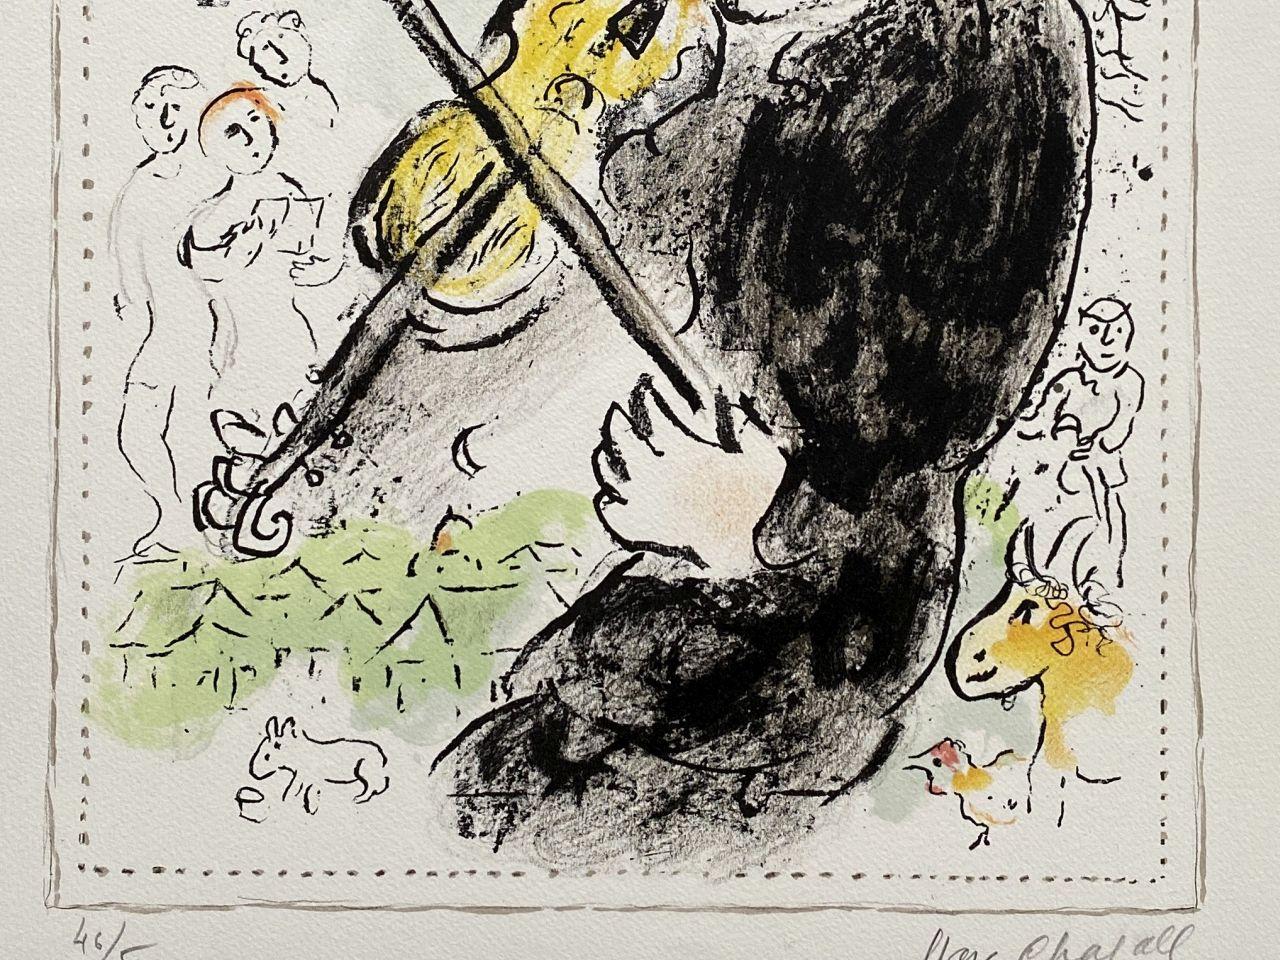 Marc CHAGALL
Violonist with a cock, 1982

Original lithograph (Mourlot workshop)
Handsigned in pencil
Numbered 46 / 50
On Arches vellum 65 x 50 cm (c. 26 x 20 in)

REFERENCES : Catalog raisonne Mourlot #1000

Very good condition but a light fold at